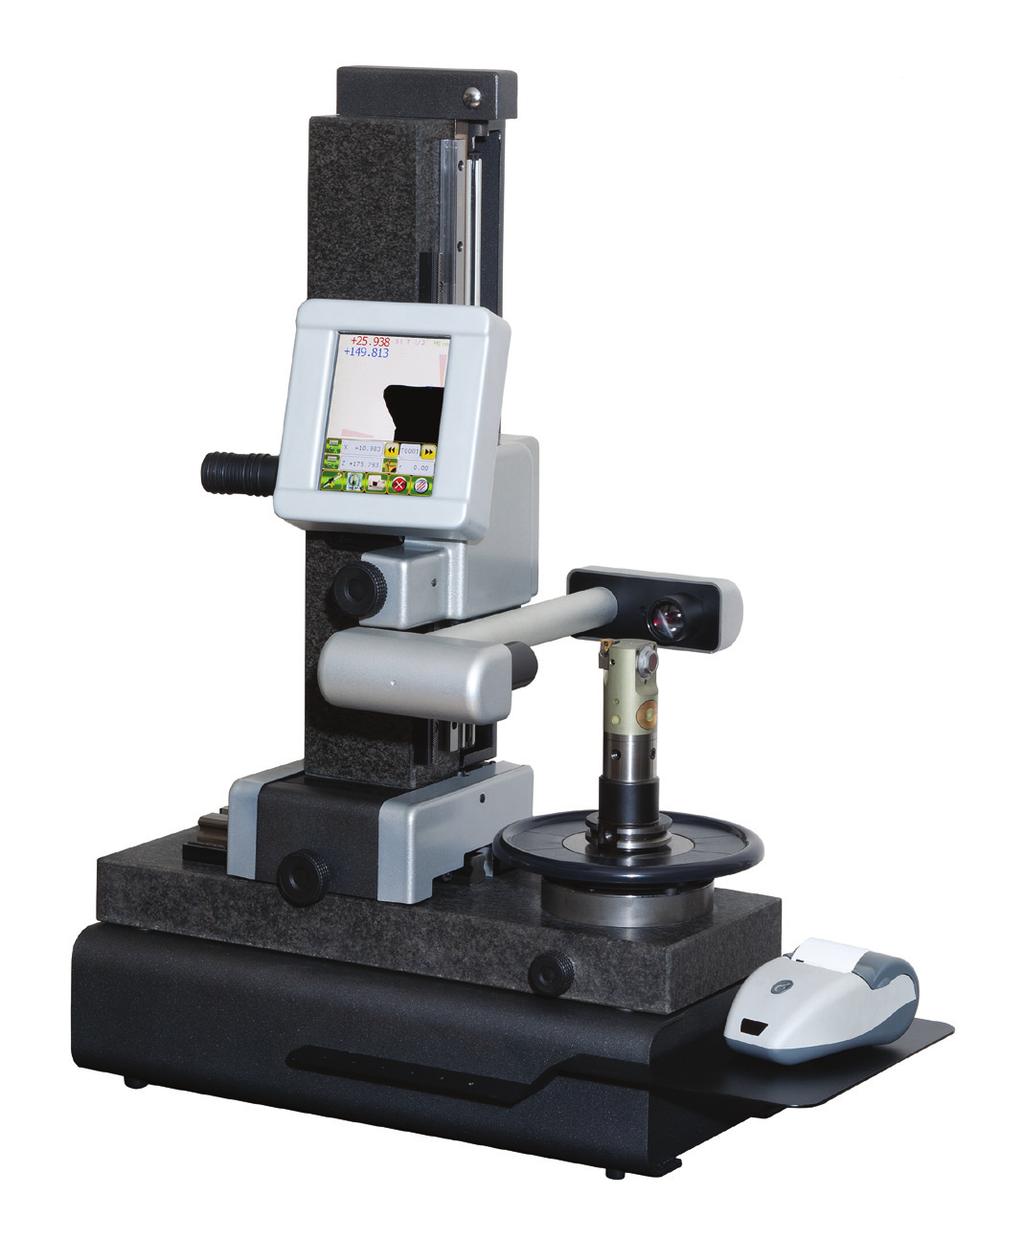 E236N - OVERVIEW Our new E236N Tool Presetting machine has been developed as the entry level option for our new generation of advanced tool presetting machines.